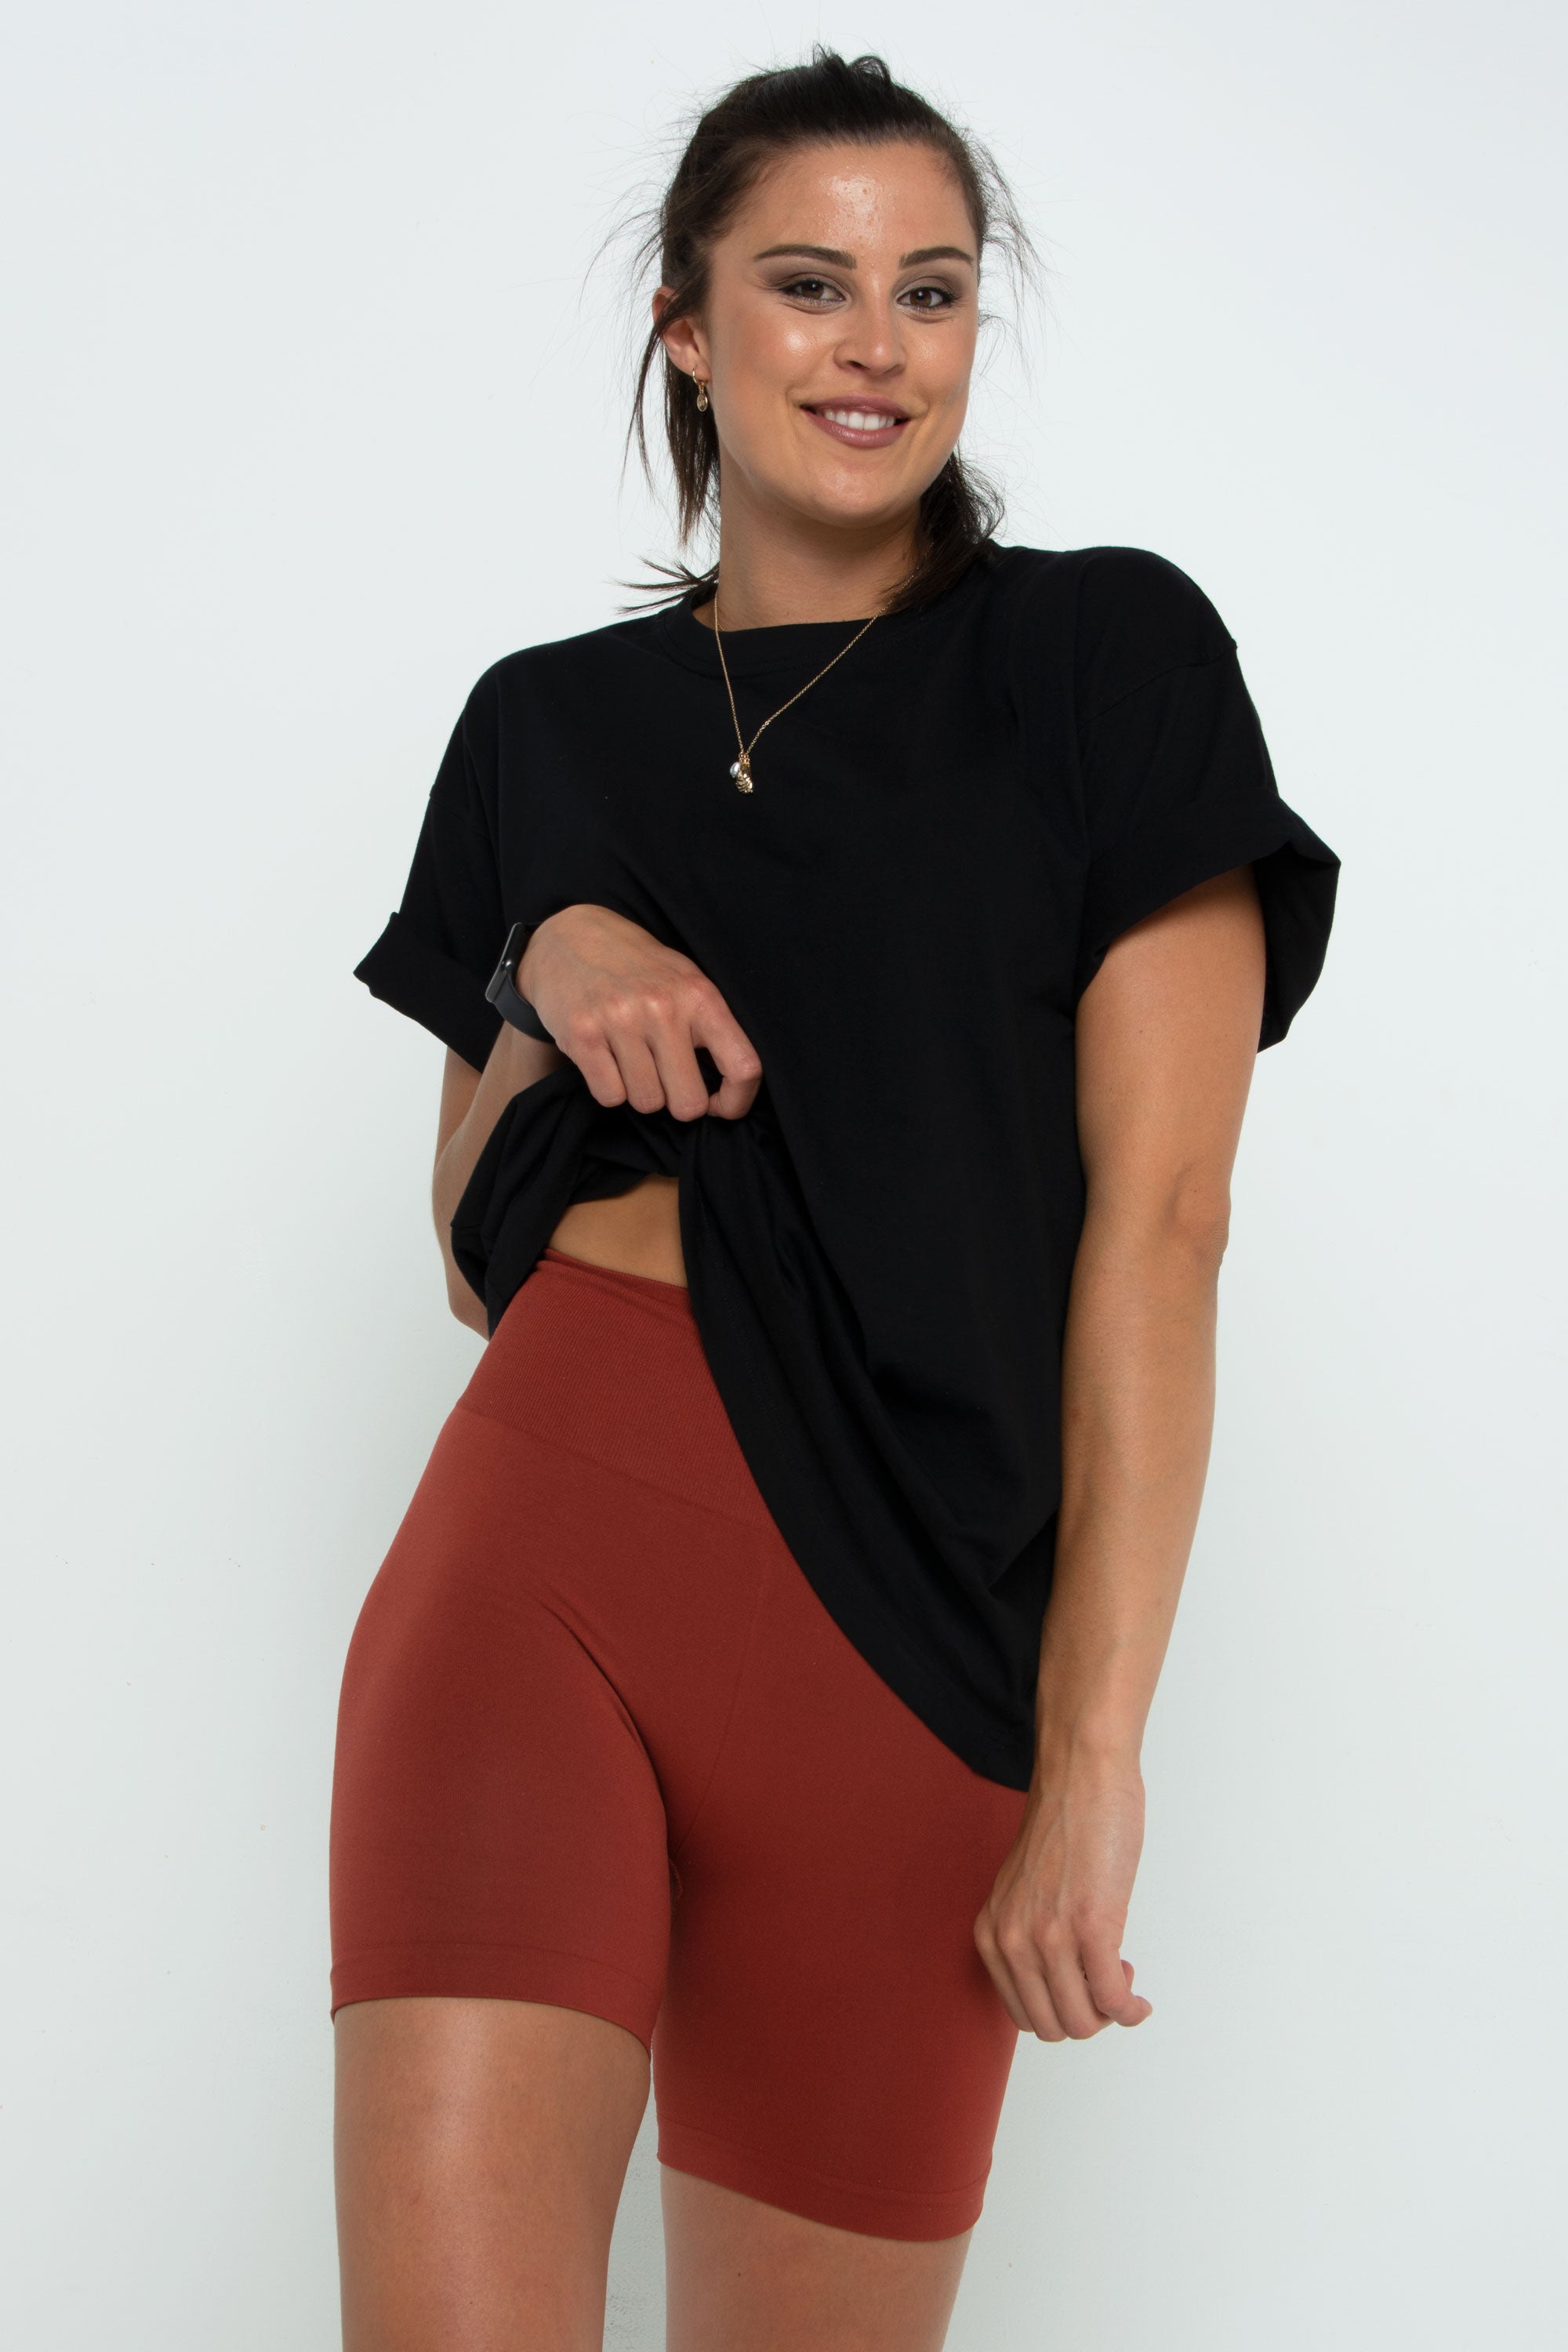 TALL GIRL MISSGUIDED HAUL THE BEST CLOTHES FOR TALL WOMEN 5FT11+ 